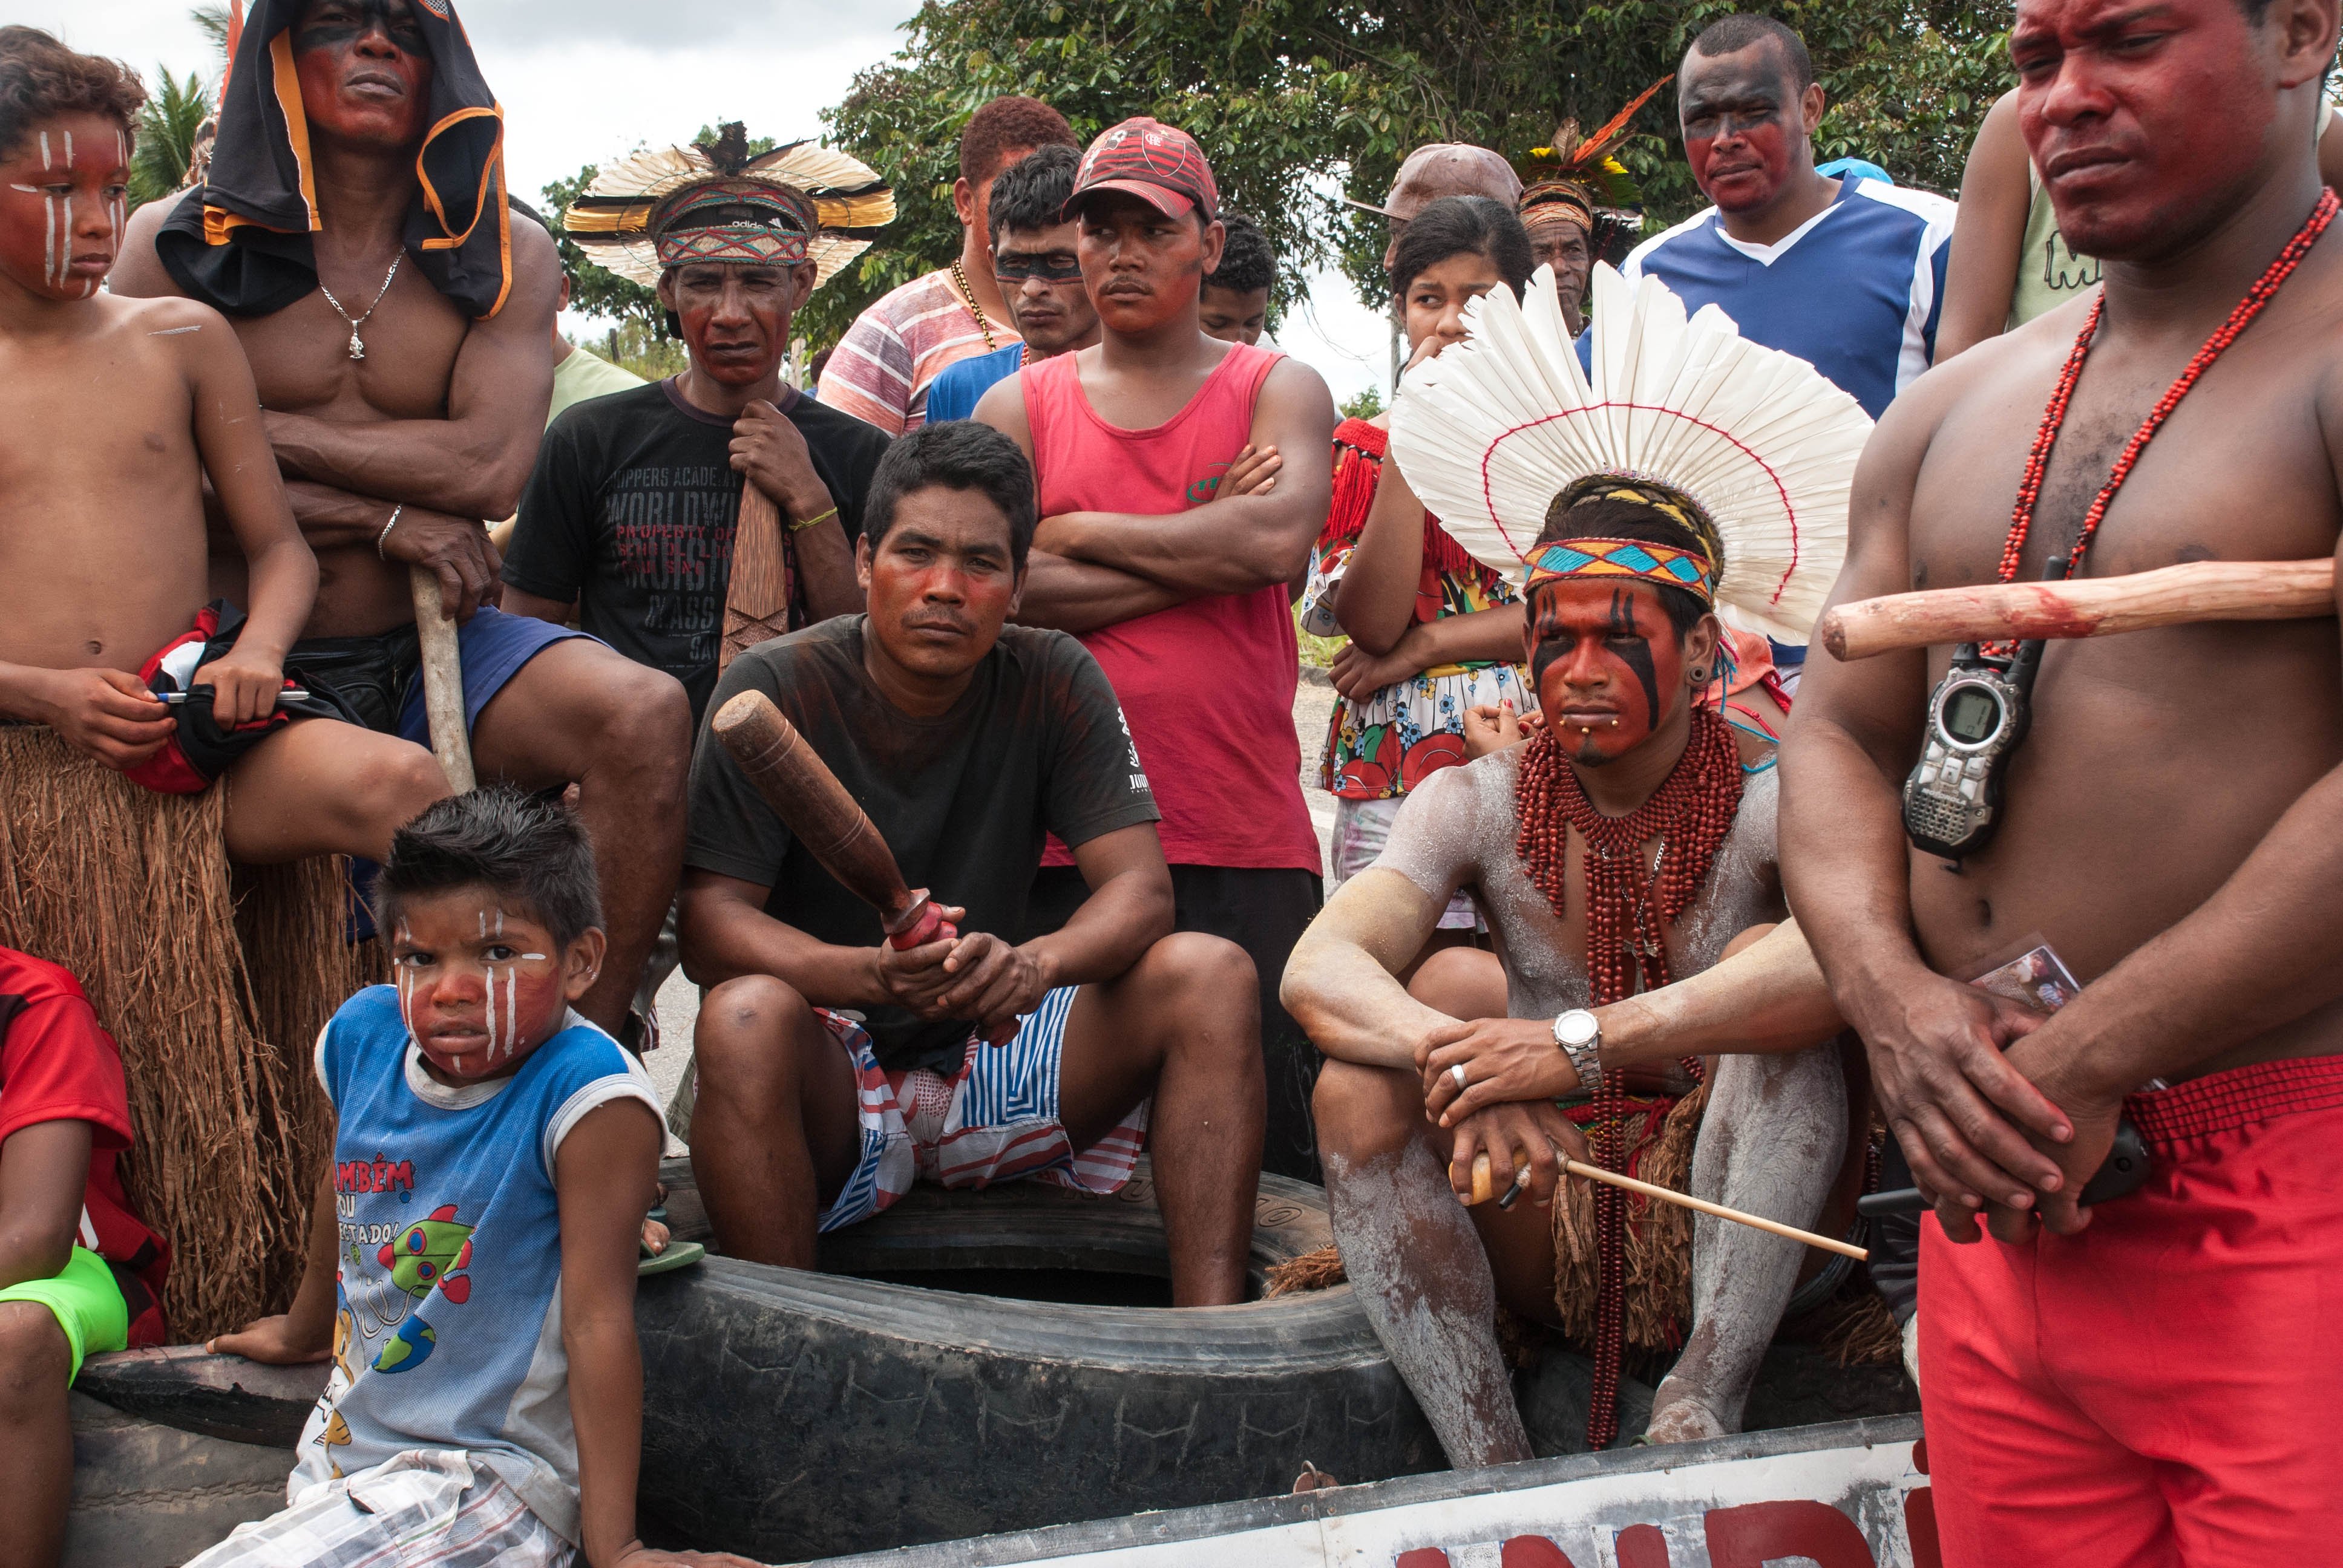 REDD, Neo-Colonialism in the Land of the Pataxo Warriors